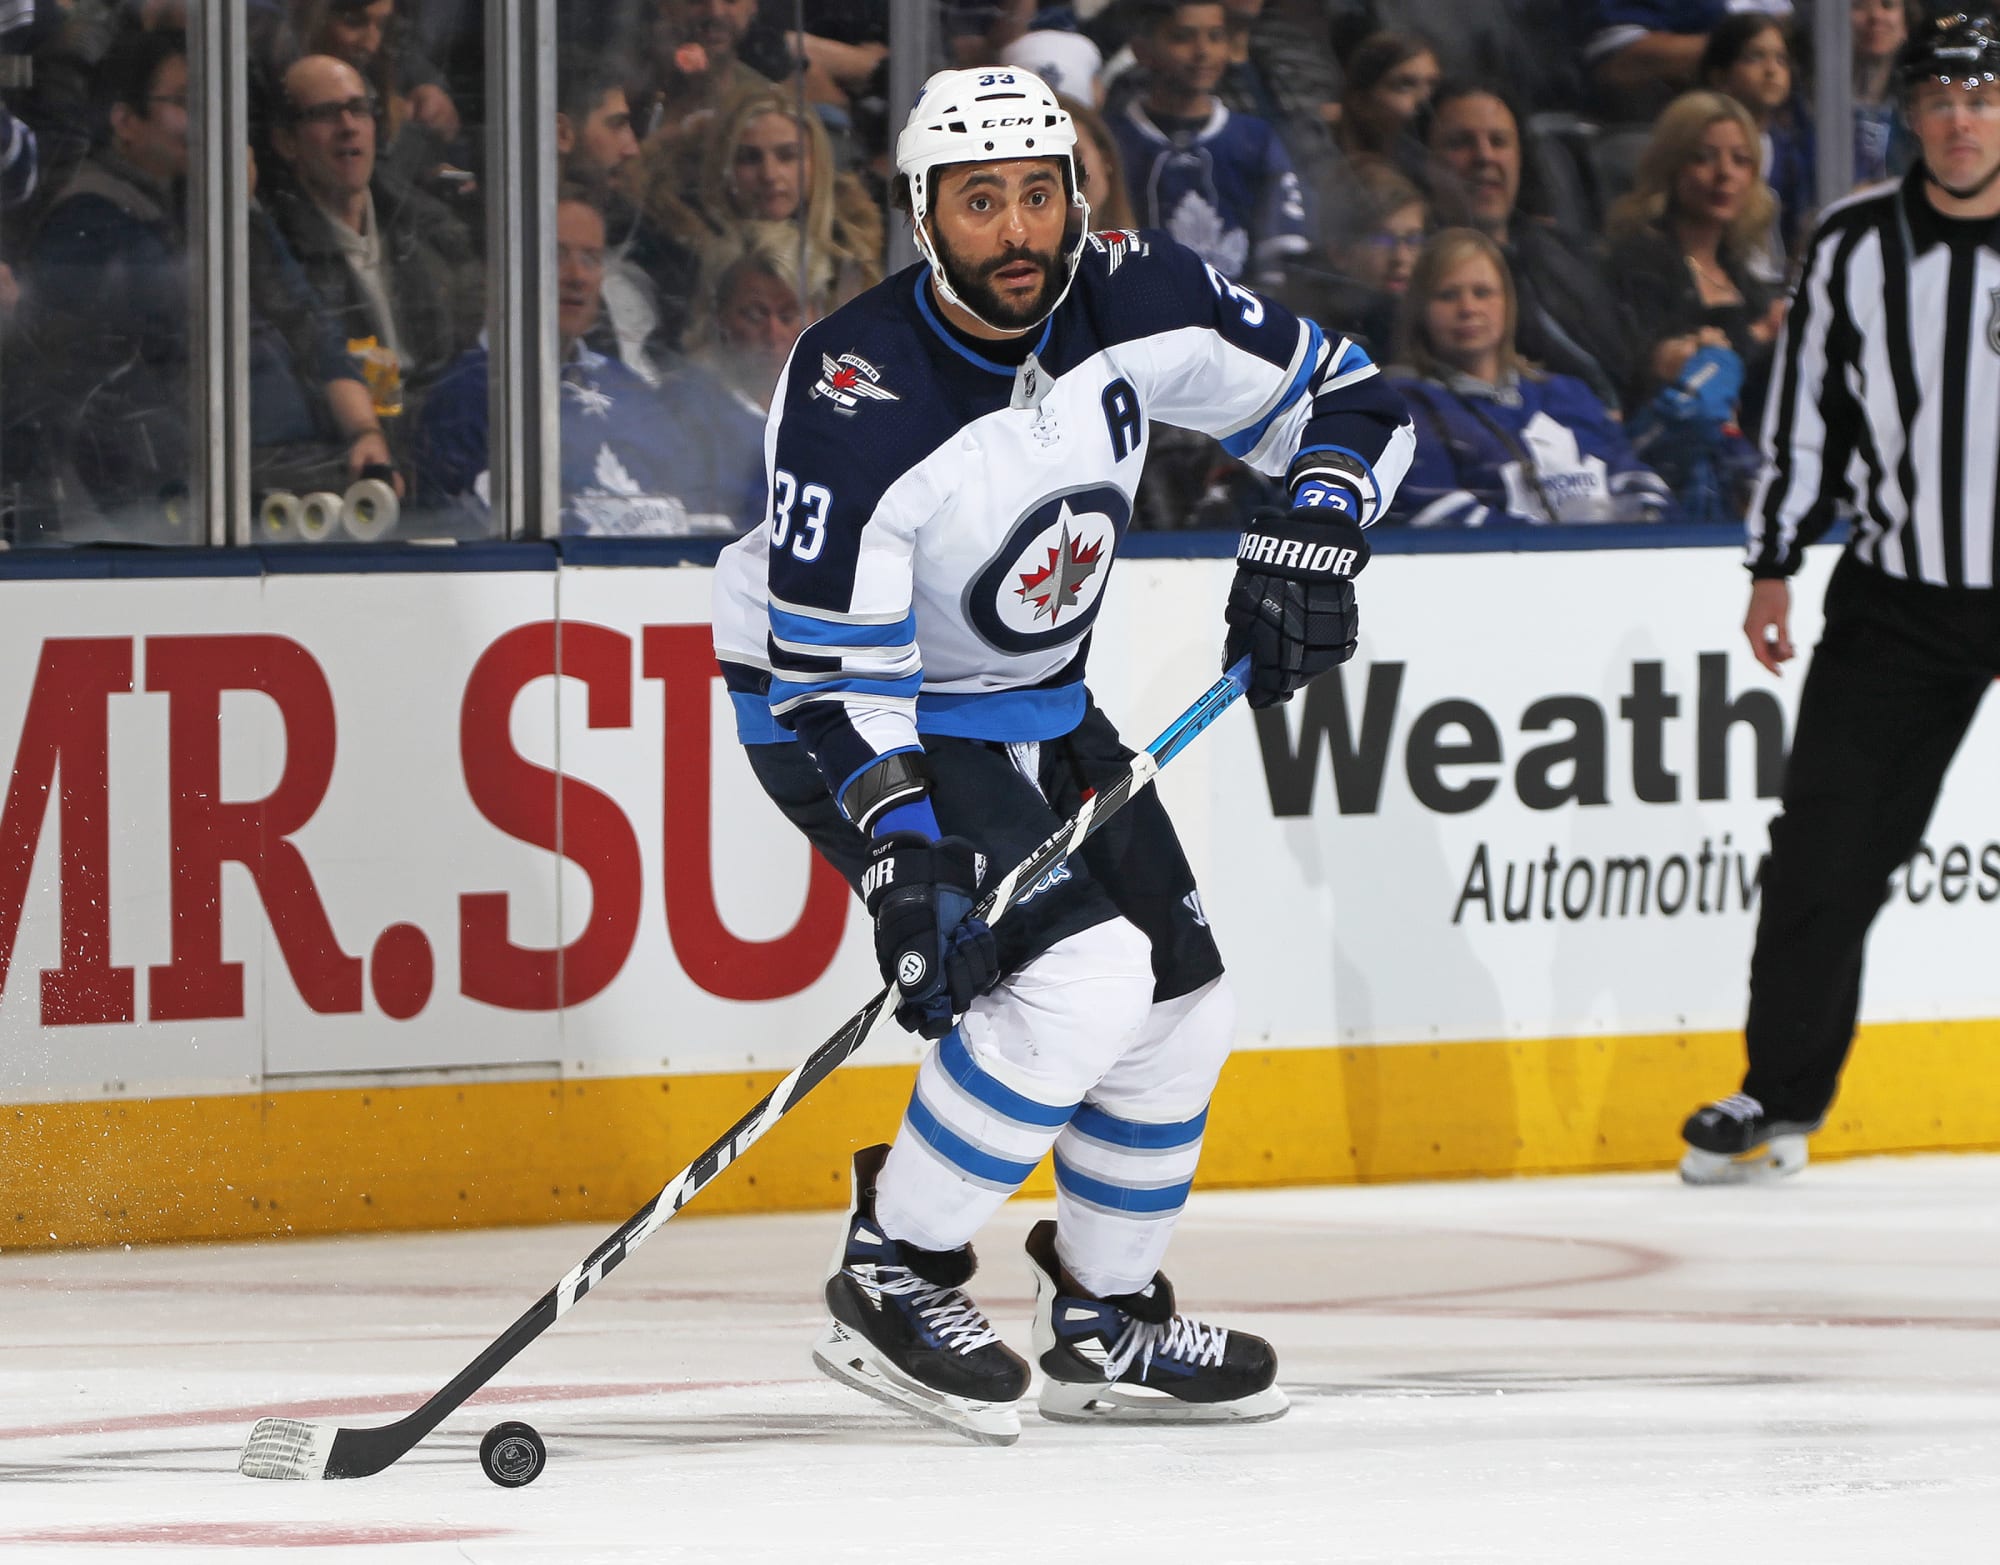 Dustin Byfuglien's ultimate decision coming shortly - HockeyFeed